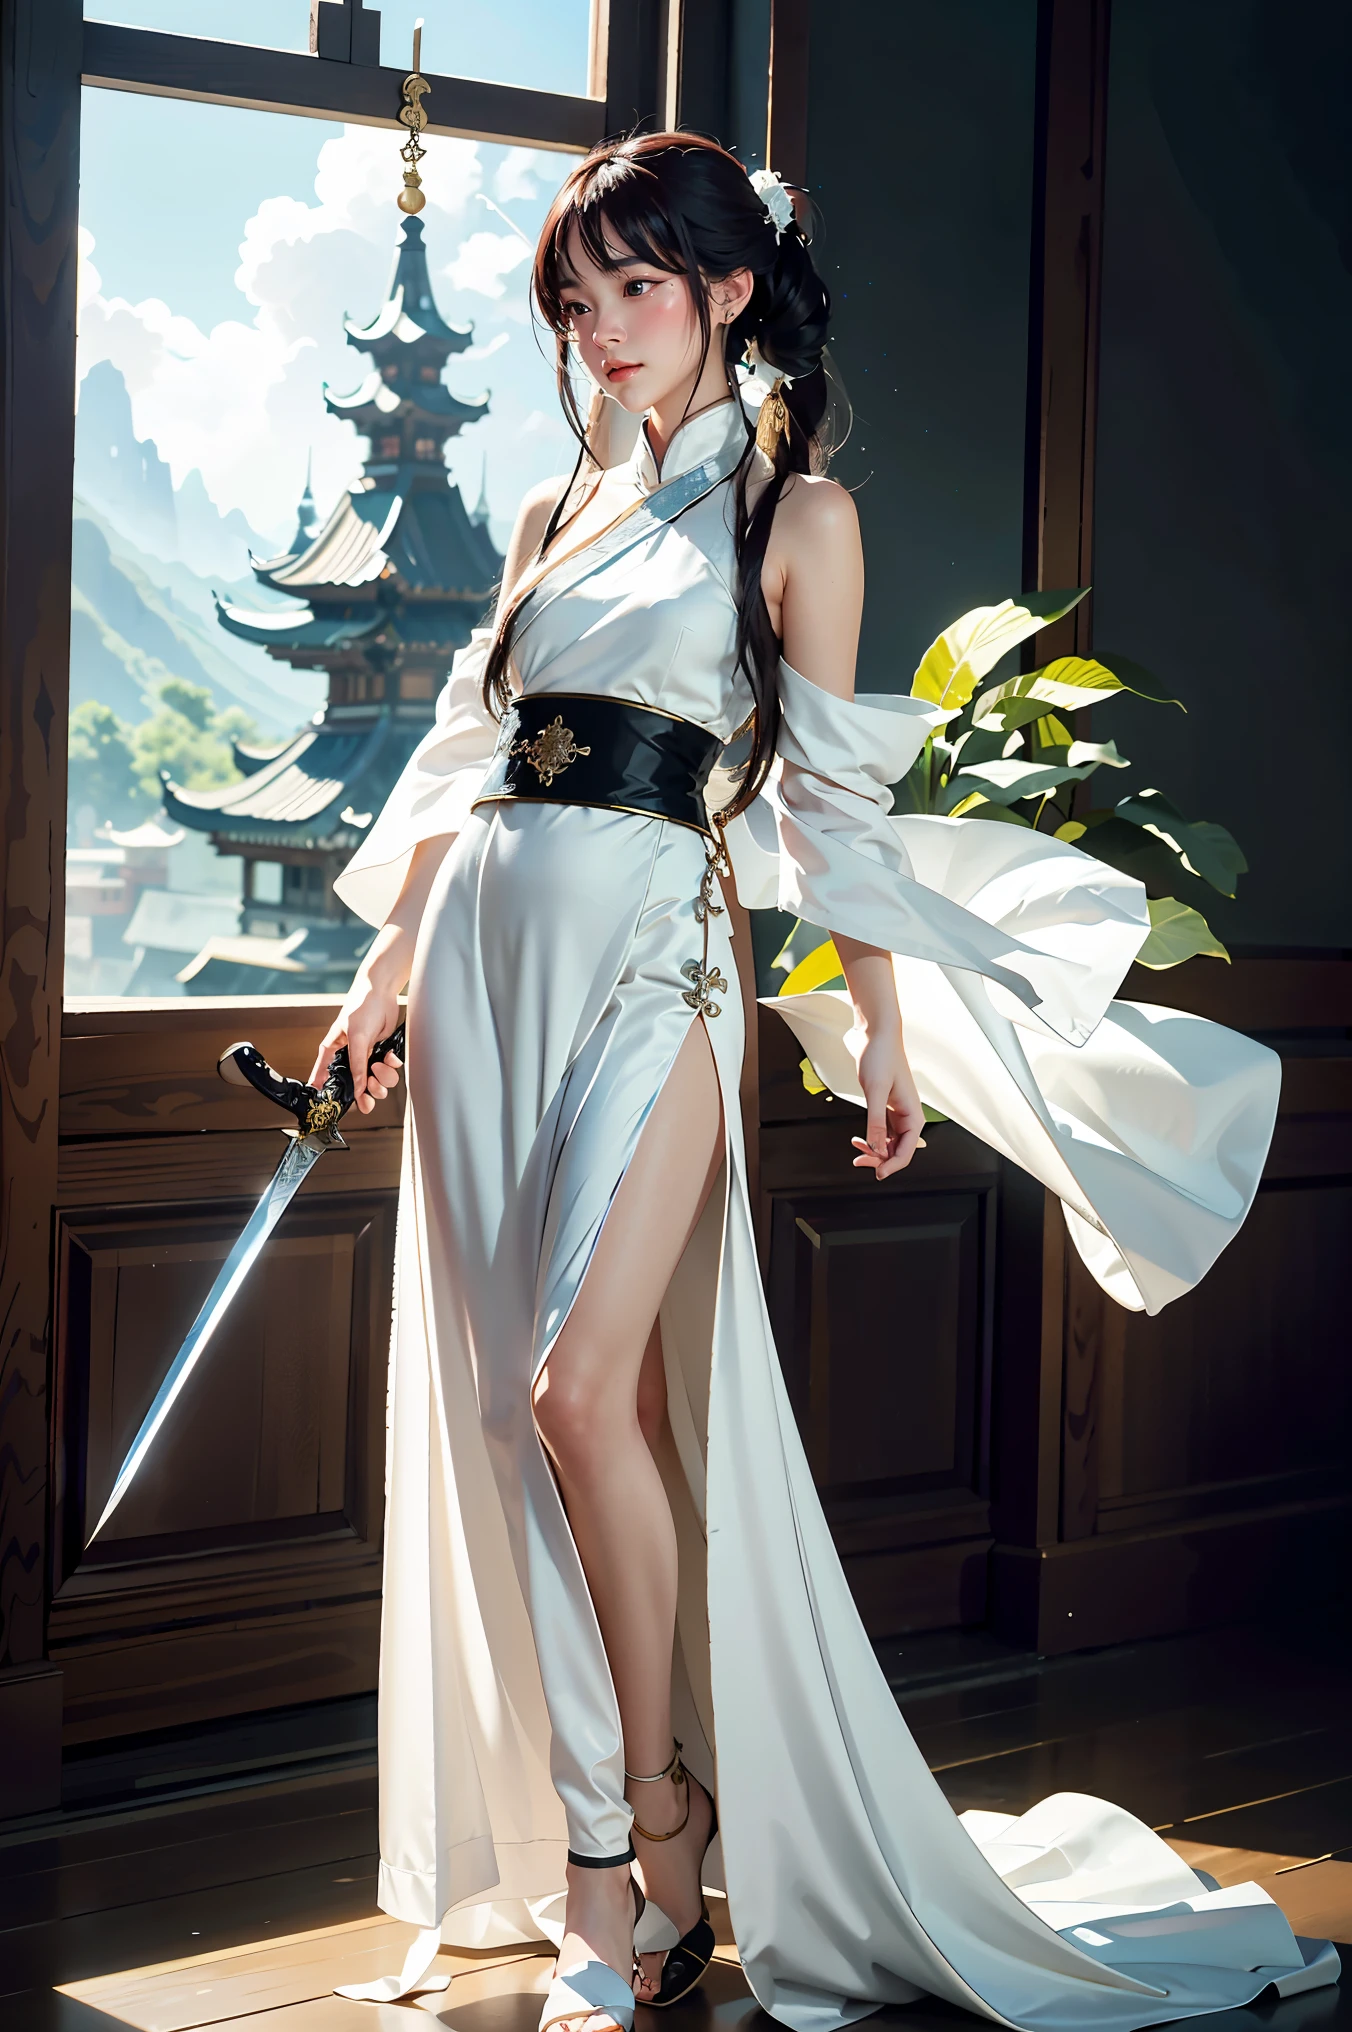 a close up of a woman with a sword in a white dress, a character portrait by Yang J, trending on cgsociety, fantasy art, beautiful character painting, artwork in the style of guweiz, guweiz, white hanfu, flowing white robes, full body wuxia, epic exquisite character art, stunning character art, beautiful female assassin